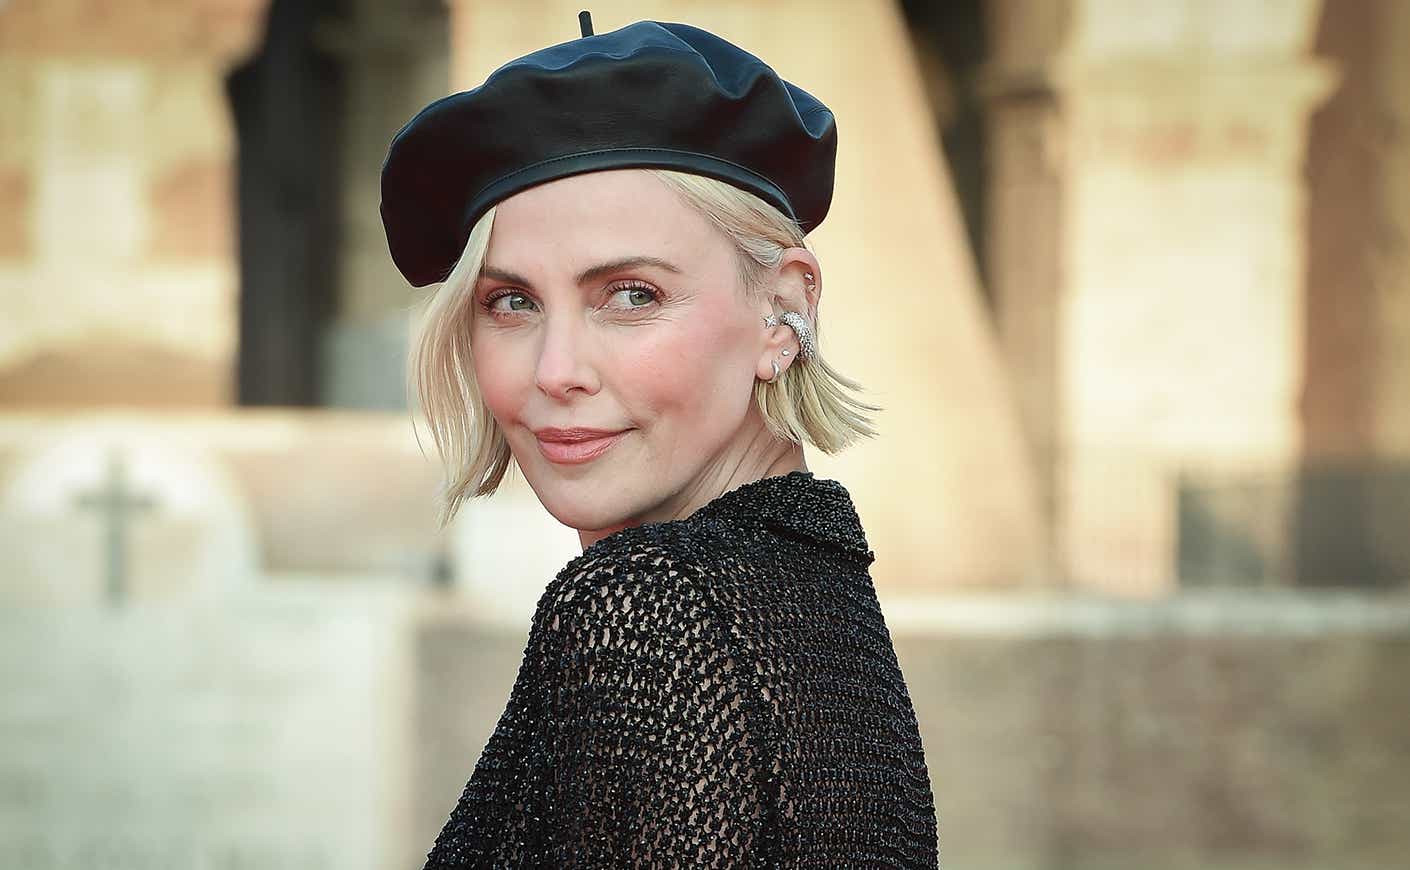 Charlize Theron wears a beret and looks over her shoulder, smiling